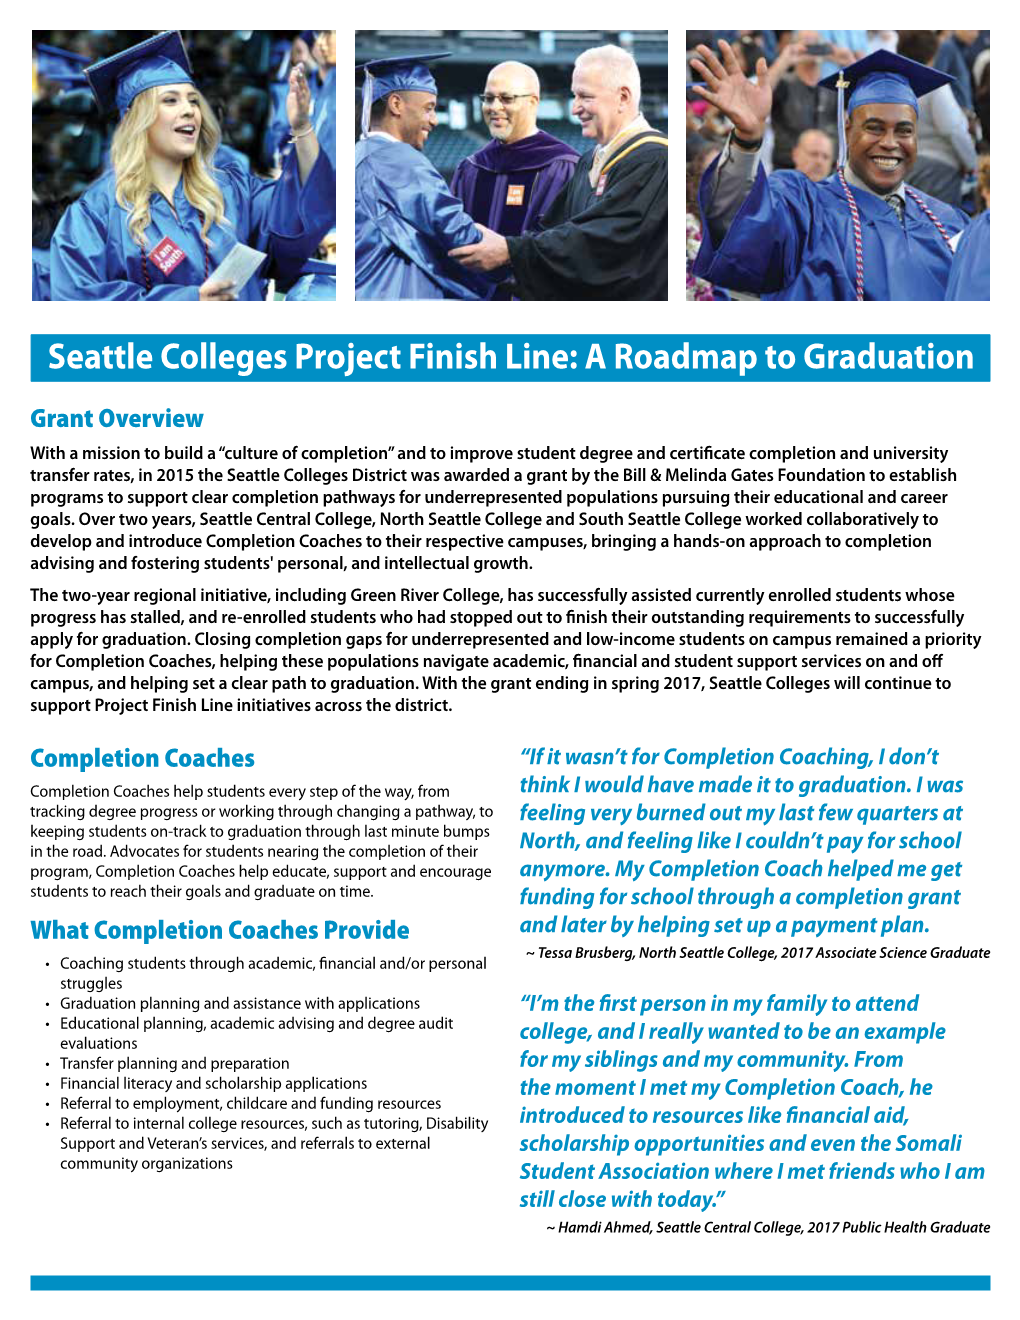 Seattle Colleges Project Finish Line: a Roadmap to Graduation